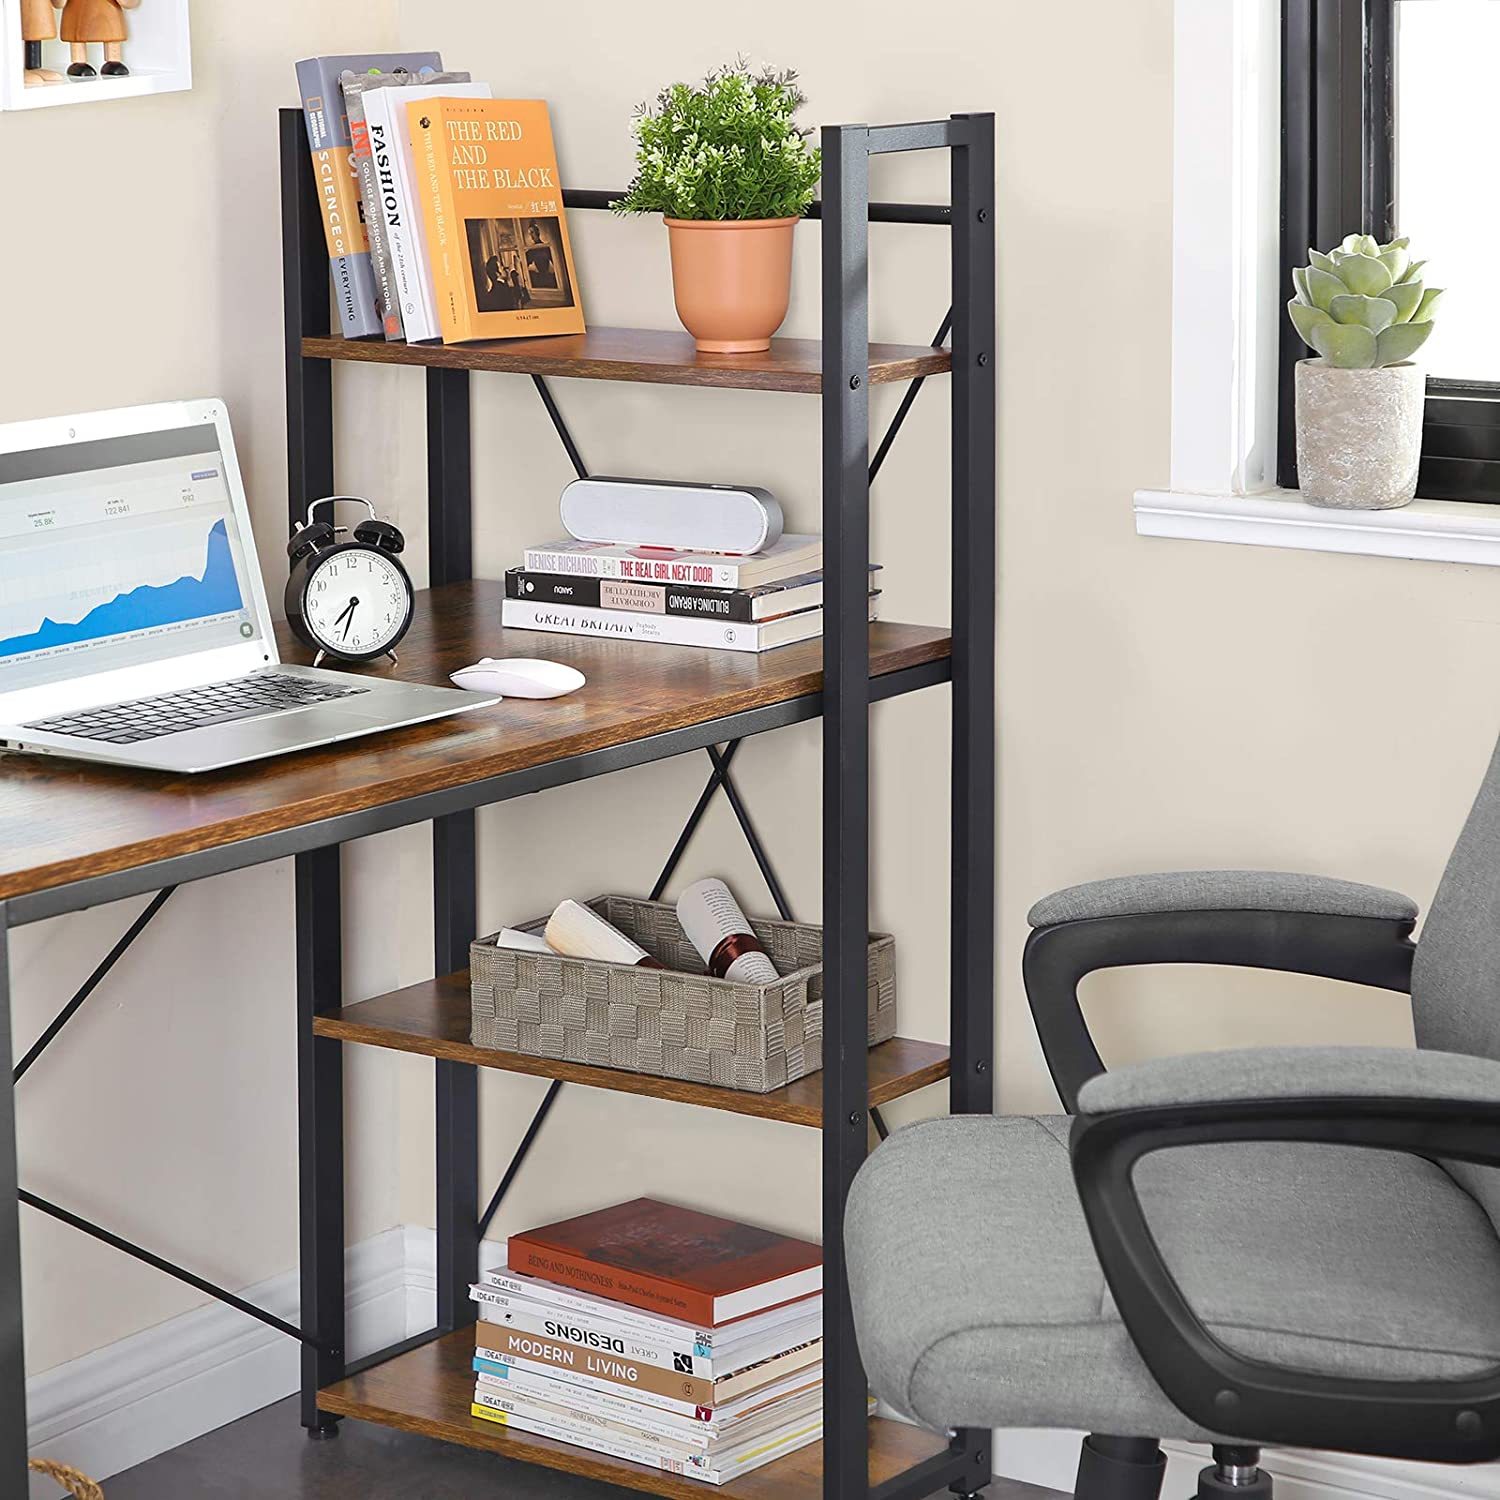 Lifespace Home Office Industrial Computer Desk with Bookshelf - Lifespace